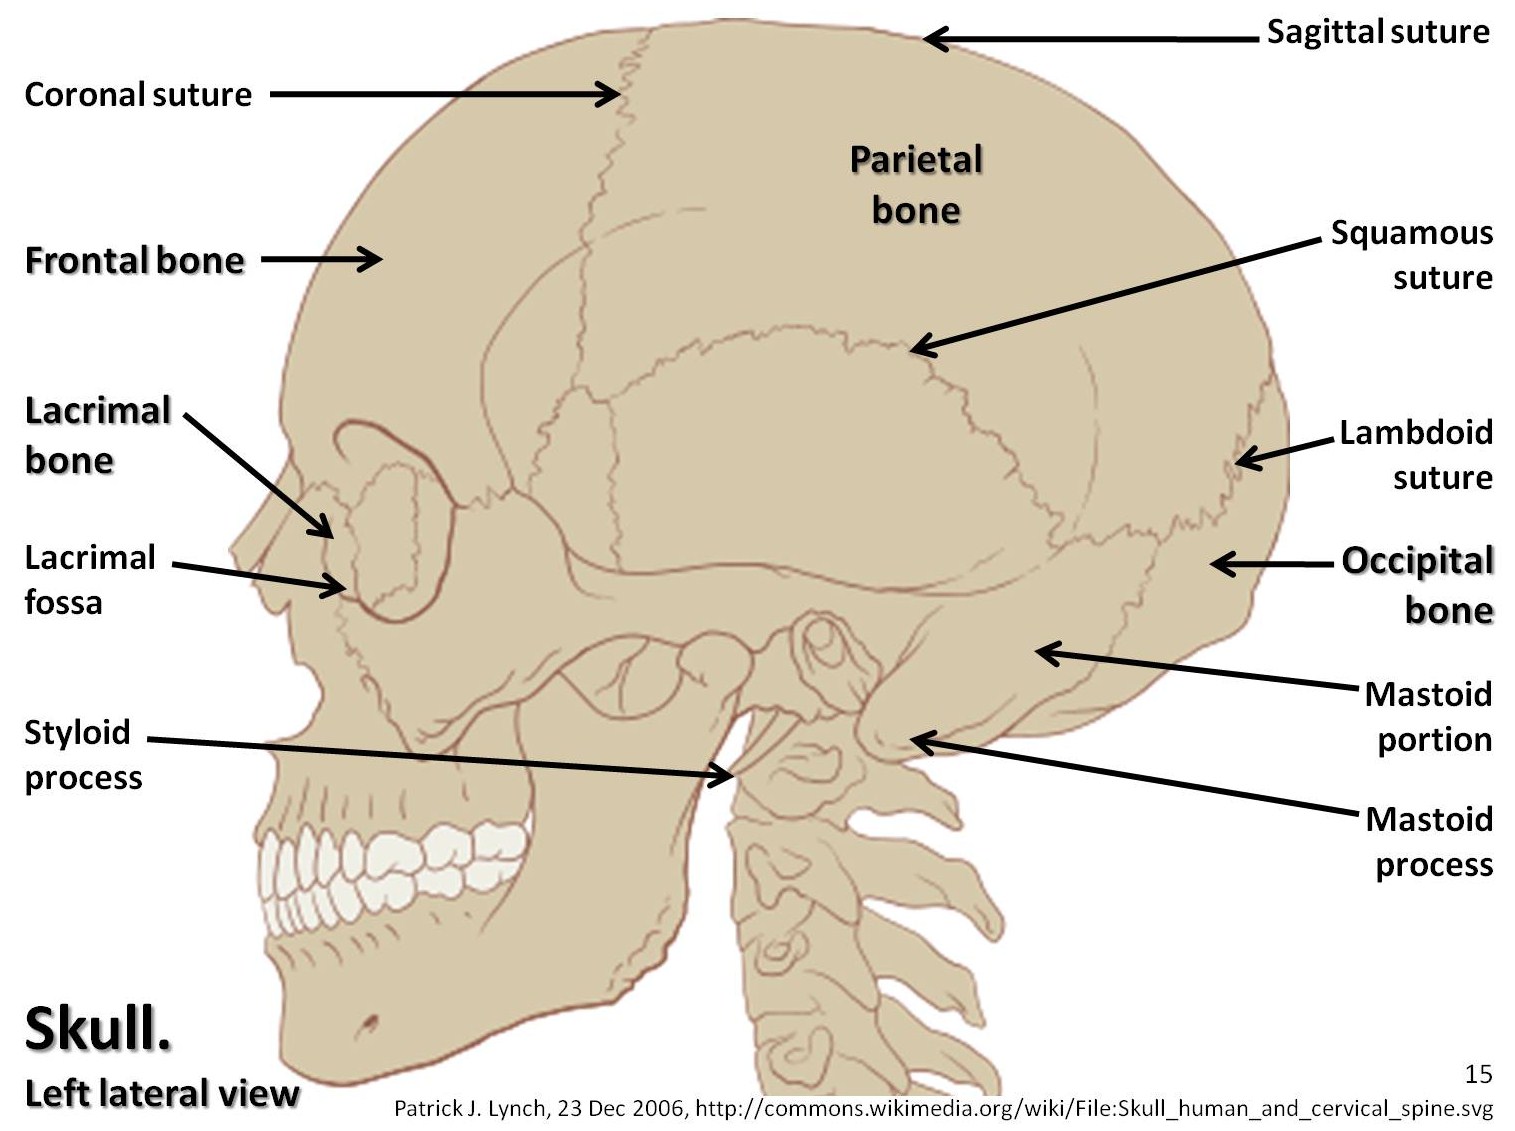 Skull Diagram Lateral View With Labels Part Axial Skeleton Visual Sexiz Pix 6599